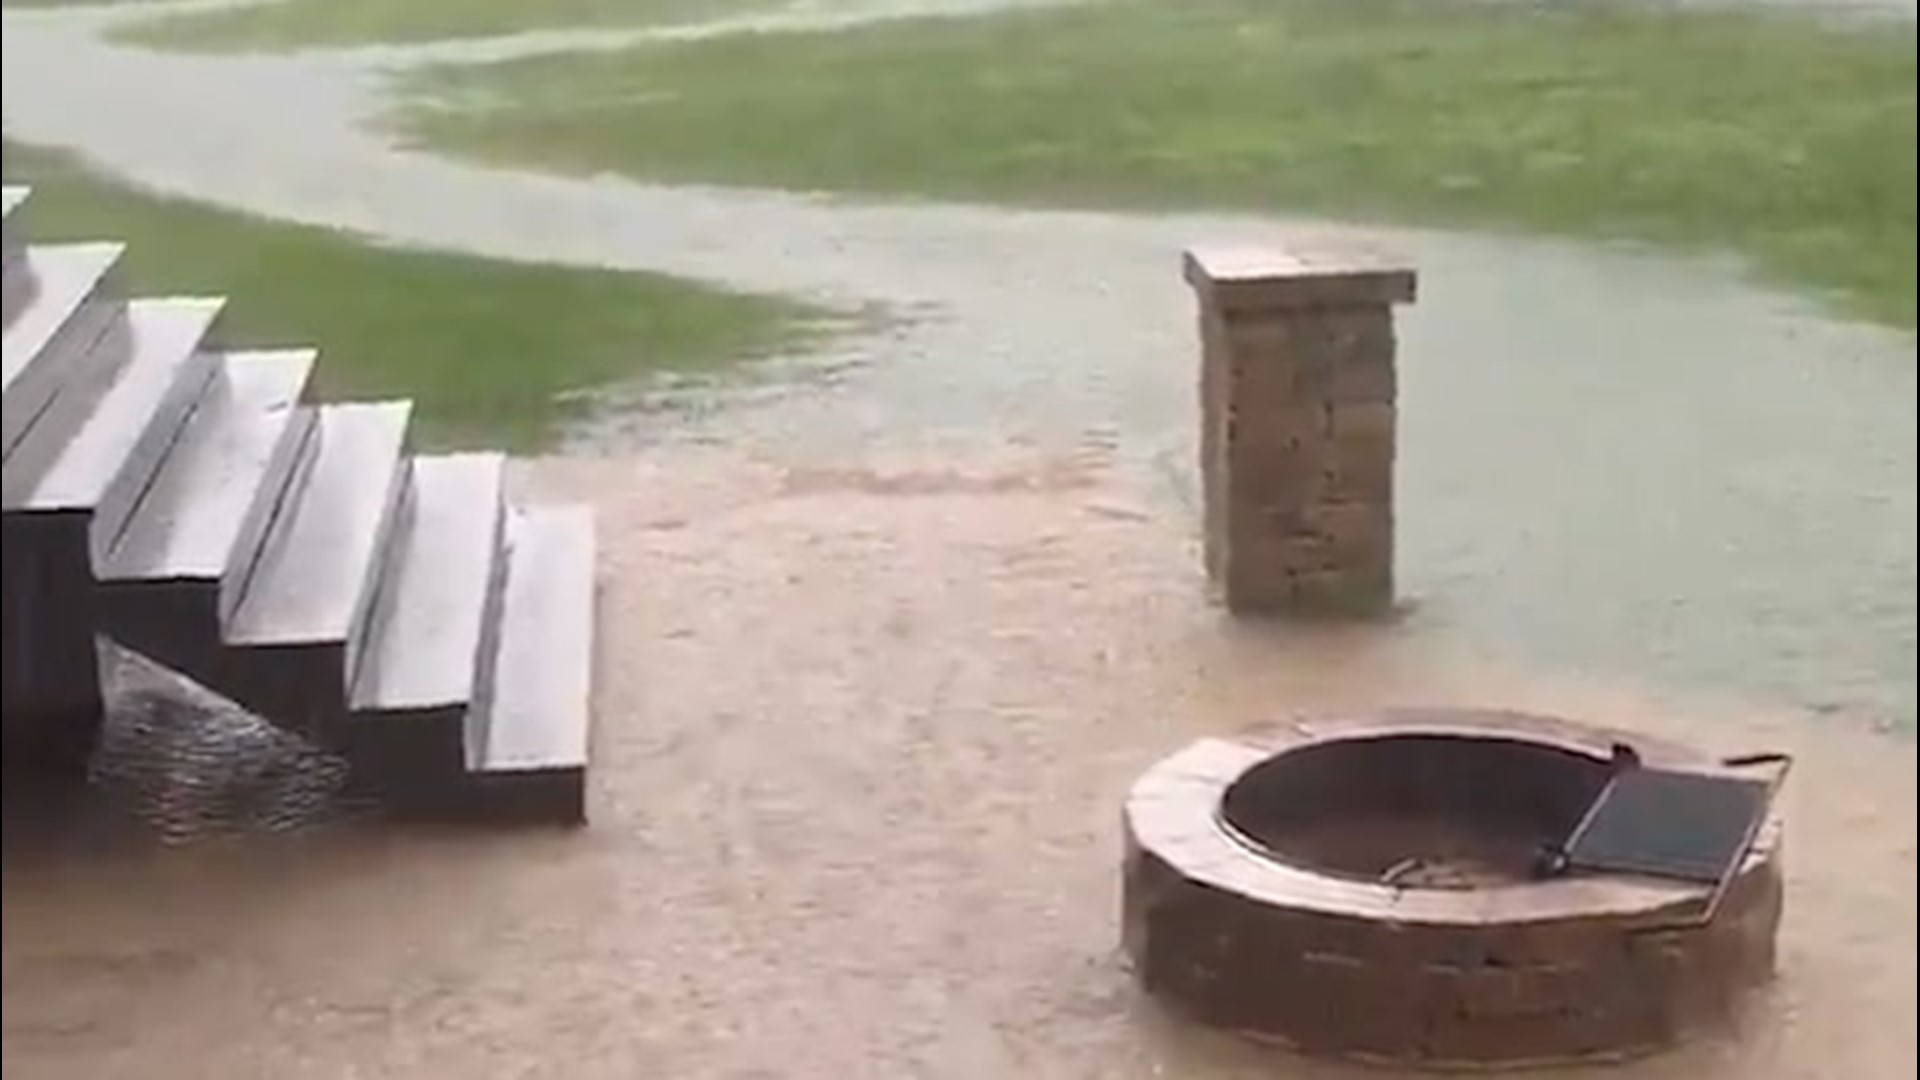 A powerful thunderstorm left parts of Louisville, Kentucky, flooded on Aug. 13, including the backyard of one home.